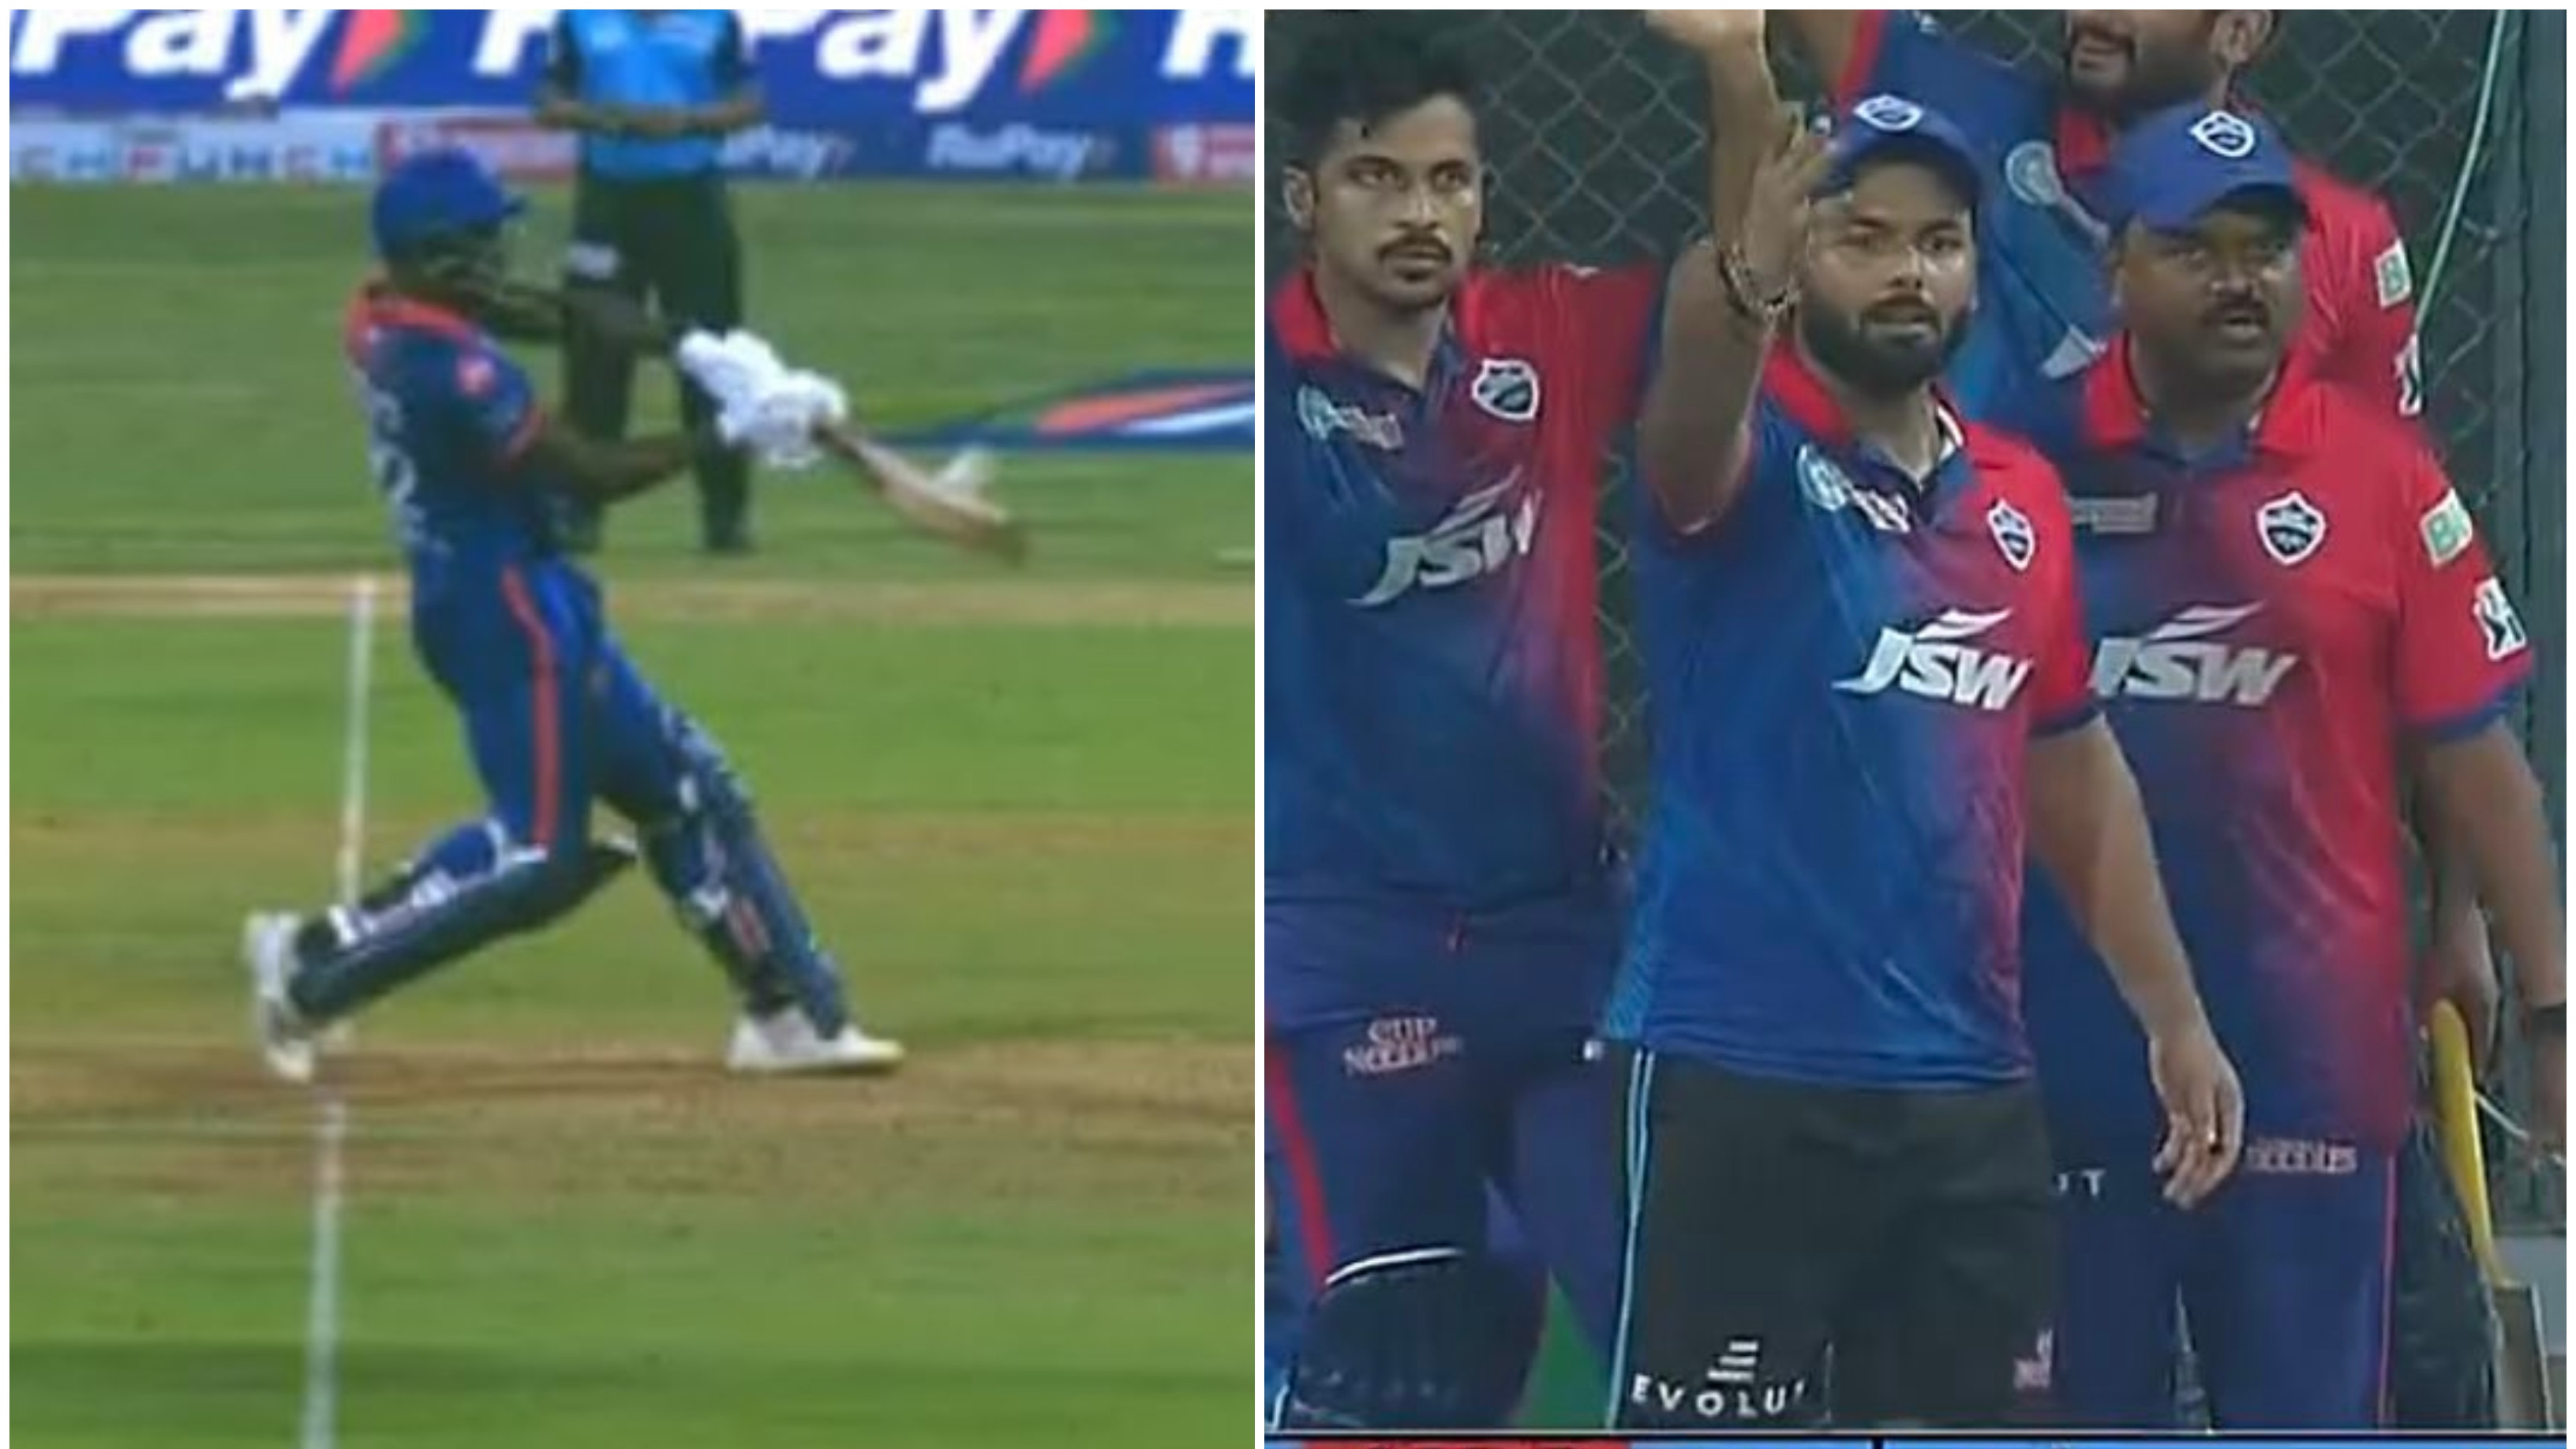 IPL 2022: WATCH – Rishabh Pant signals DC batters to leave pitch after being denied no ball, cricket fraternity reacts as RR win